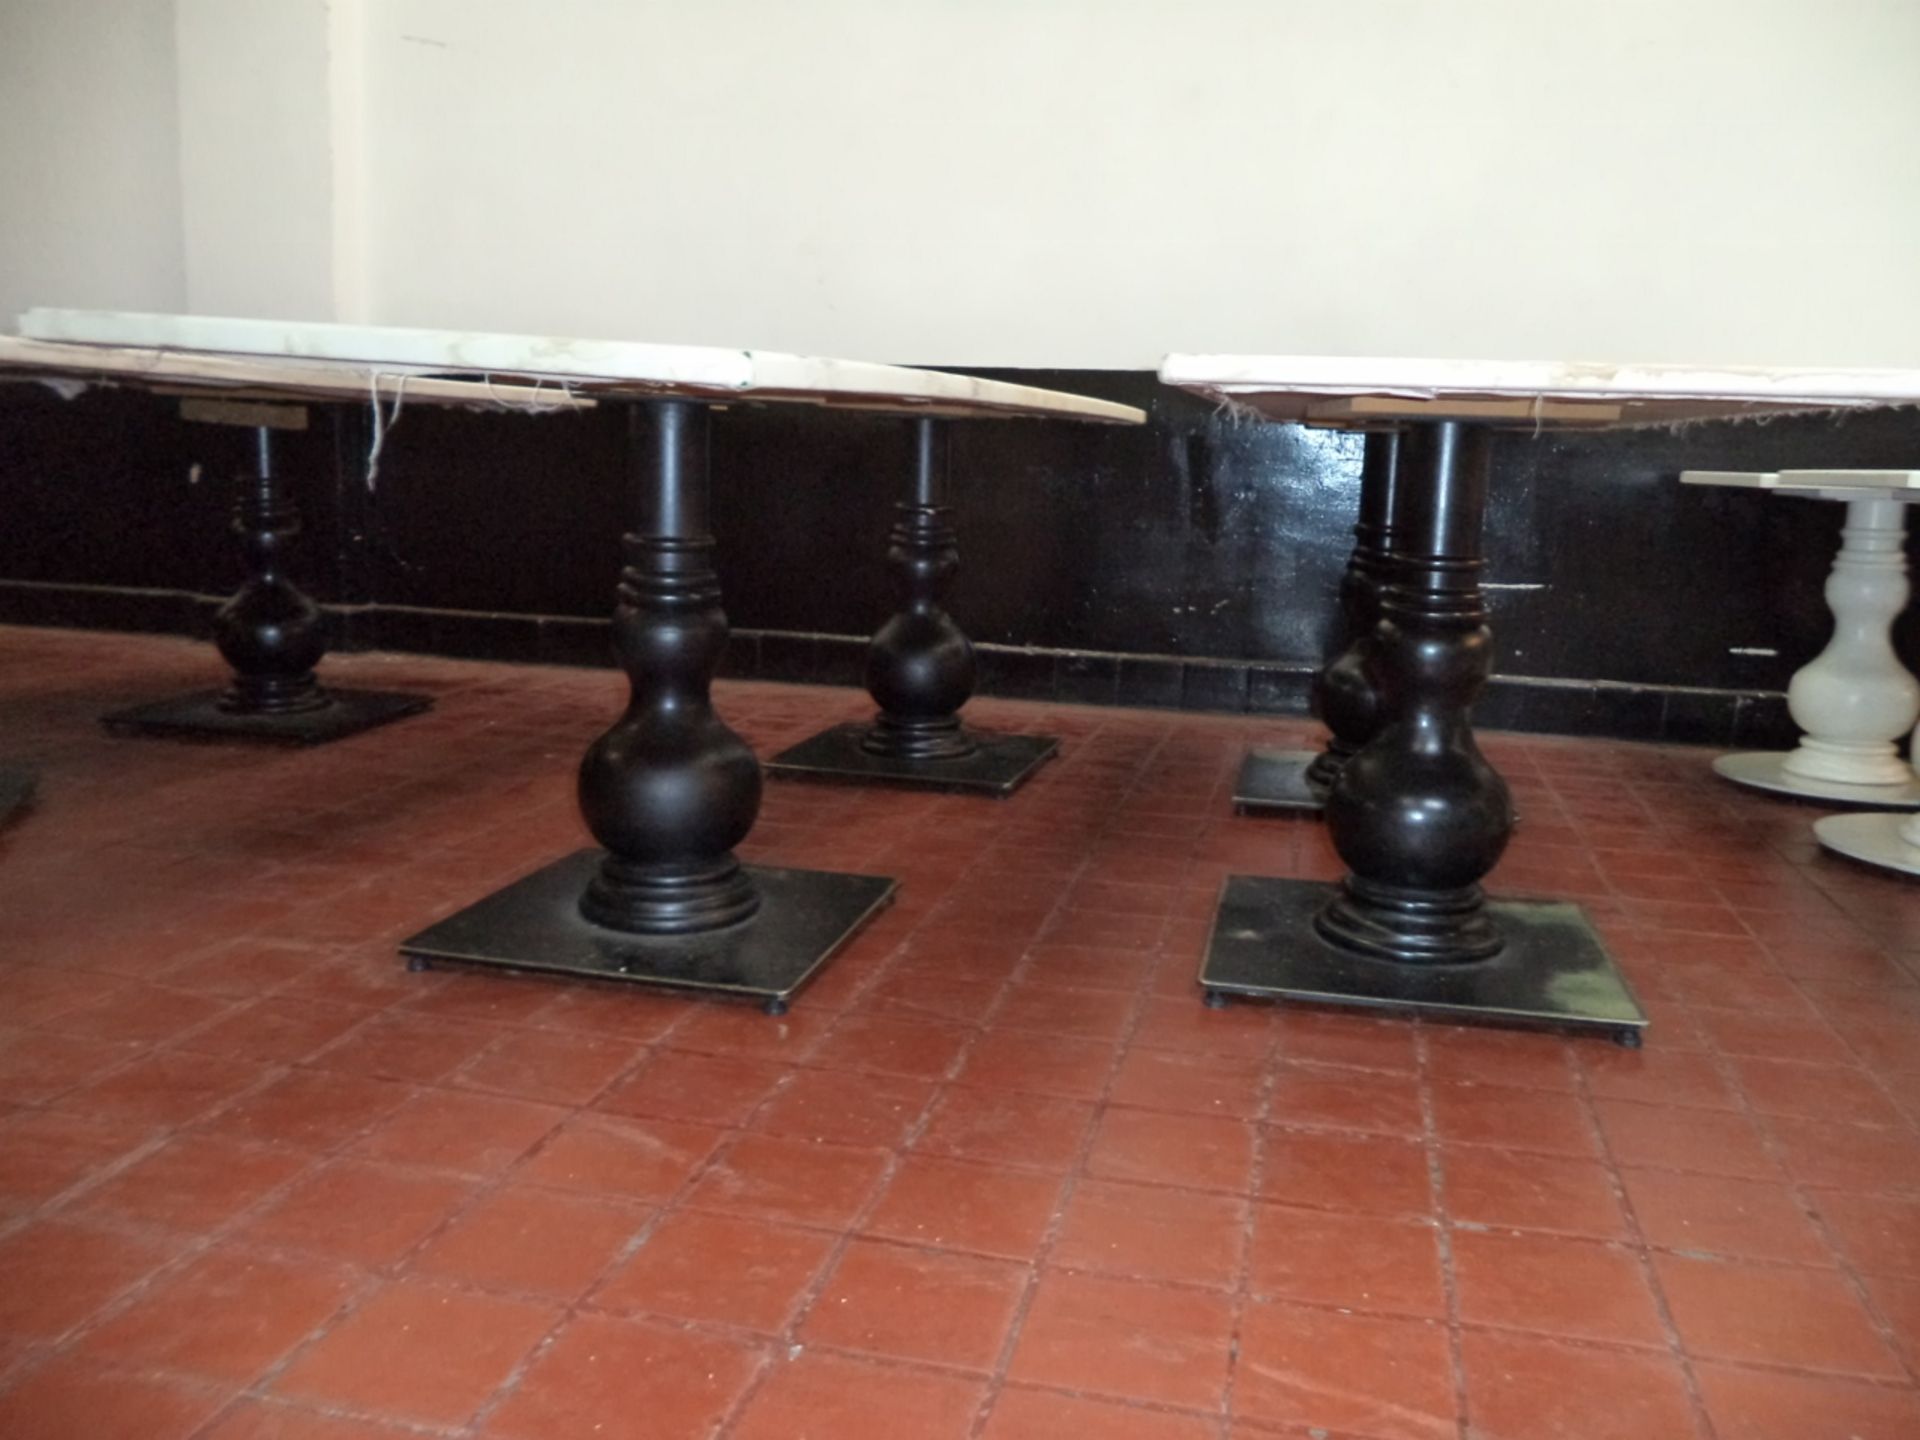 2 off rectangular tables, each 700mm wide, one being circa 187cm long and the other being circa - Image 3 of 3